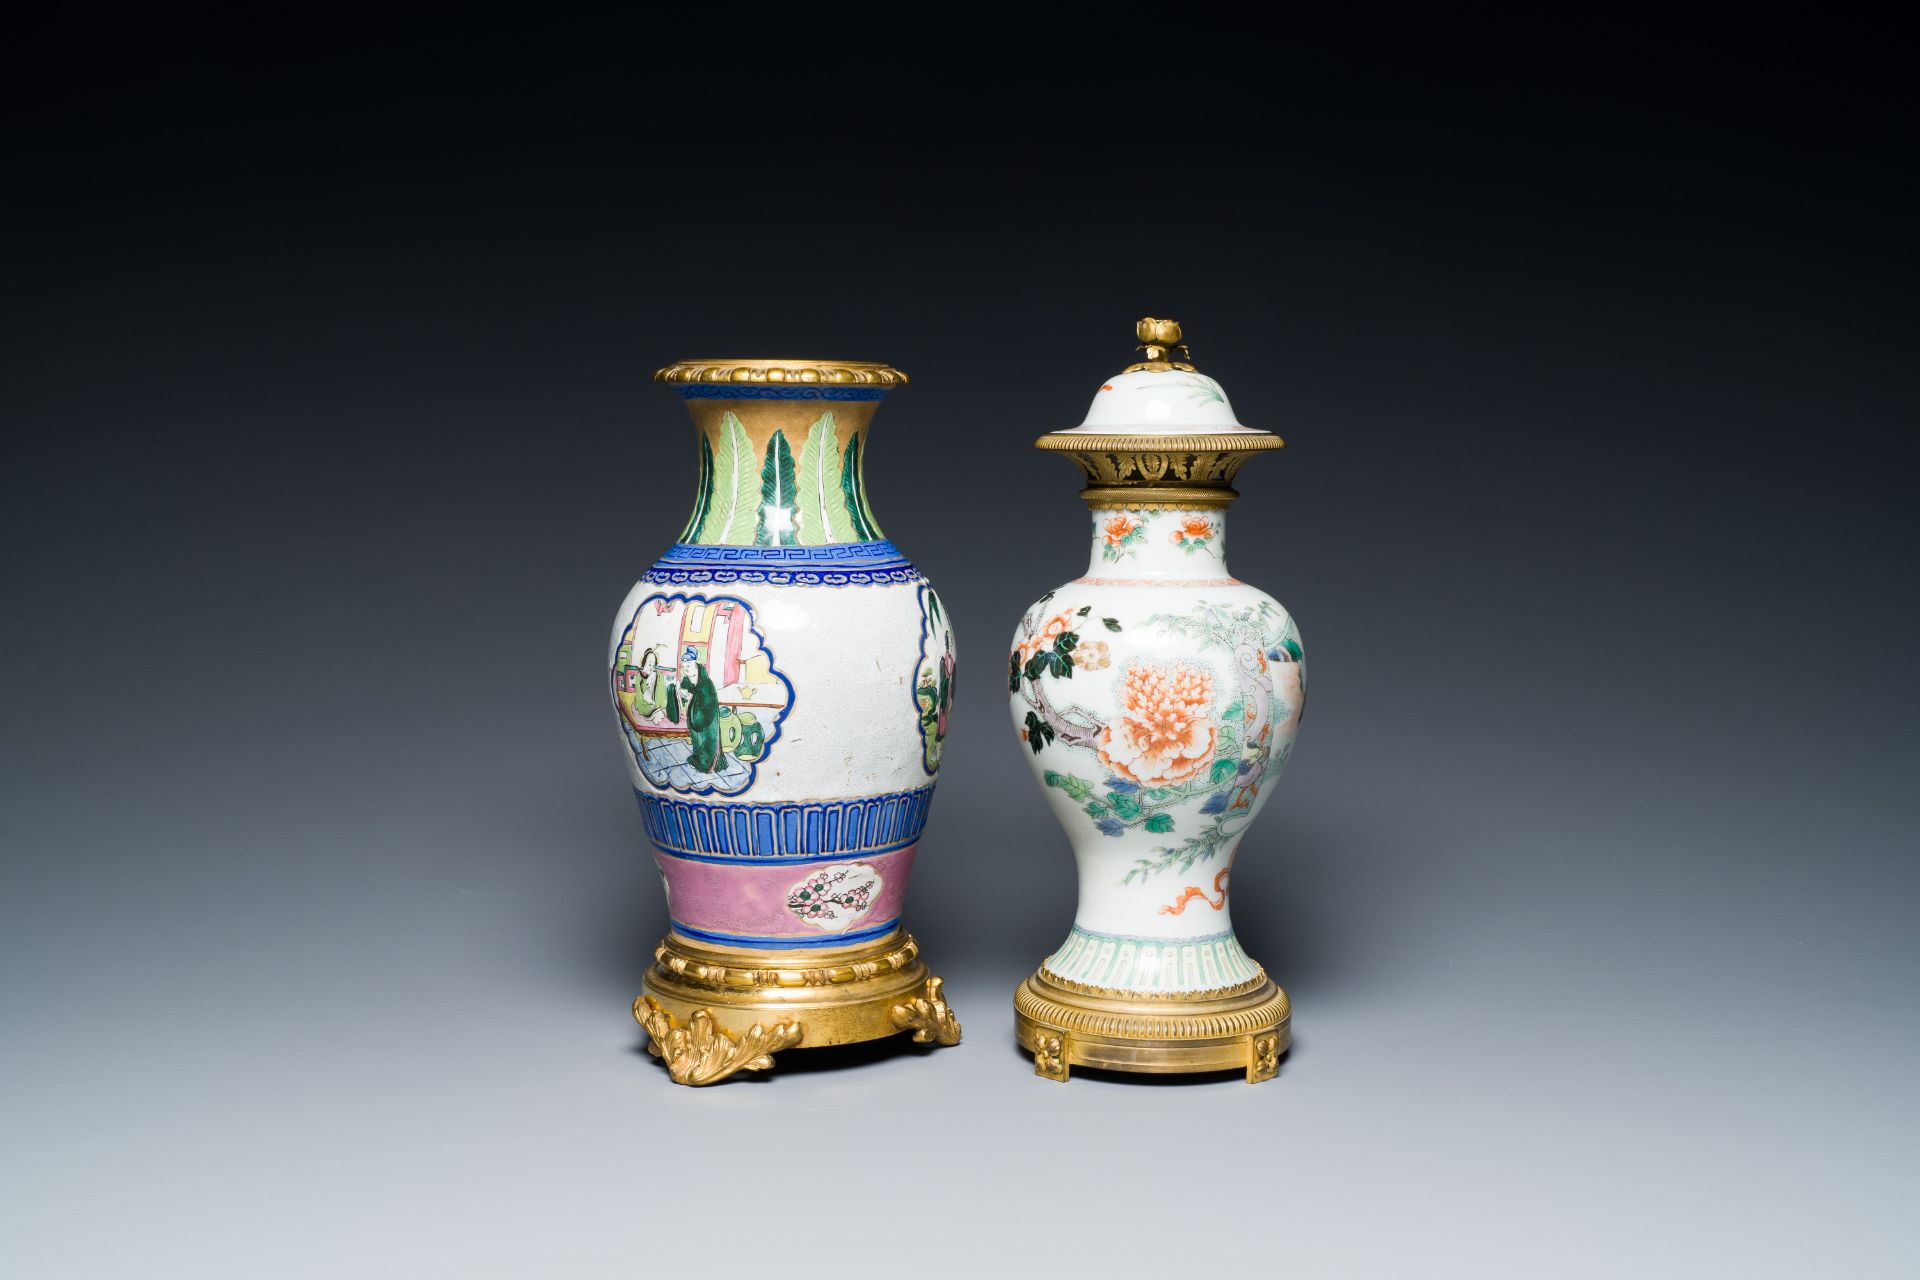 A Chinese famille verte vase and an enamelled Yixing stoneware vase with gilt bronze mounts, 19th C. - Image 2 of 6